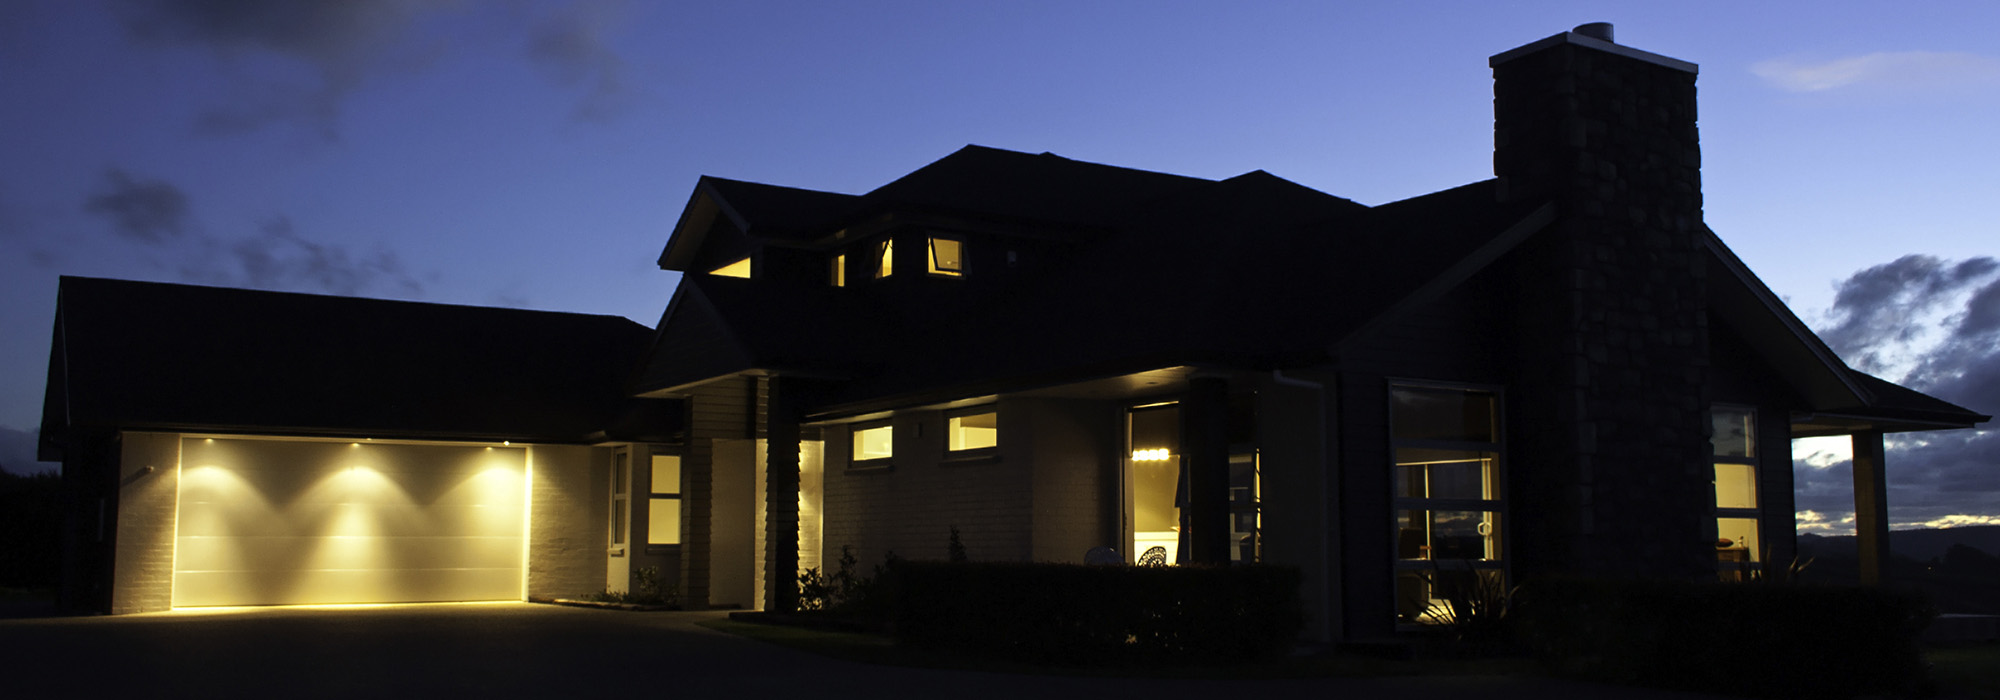 Modern house exterior with lighting at night